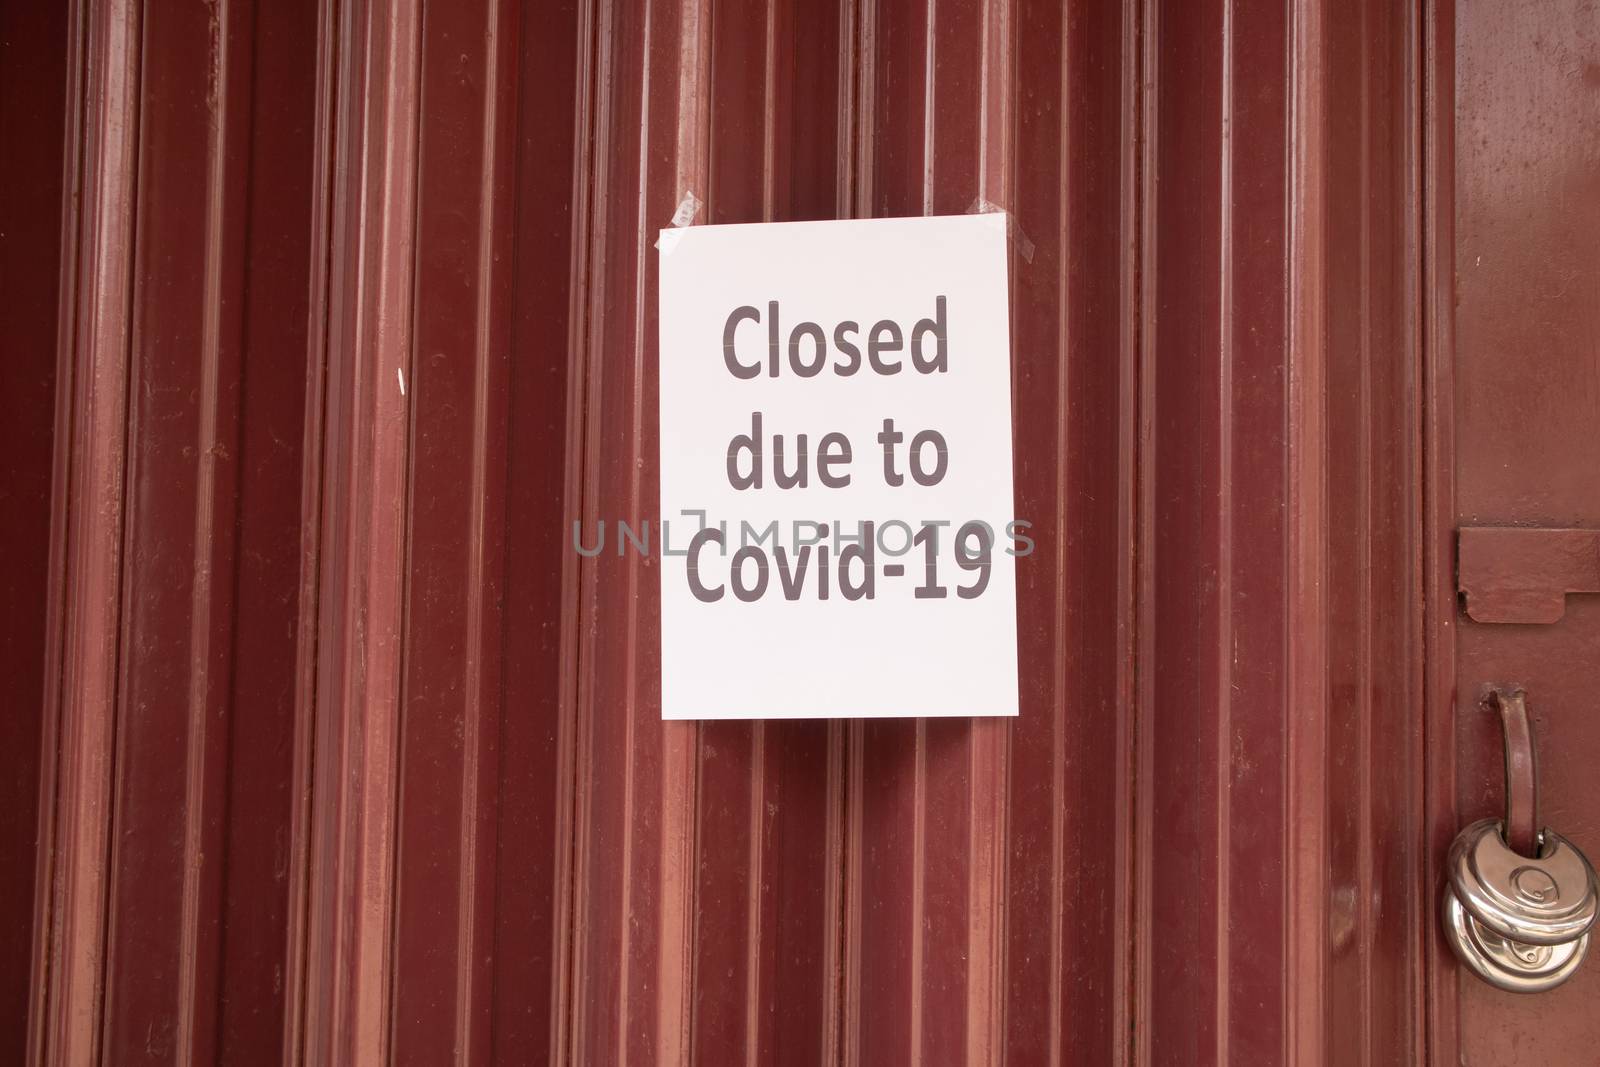 Closed due to coronavirus or covid-19 signage on Closed shutter door in front of shop or store due to coronavirus outbreak